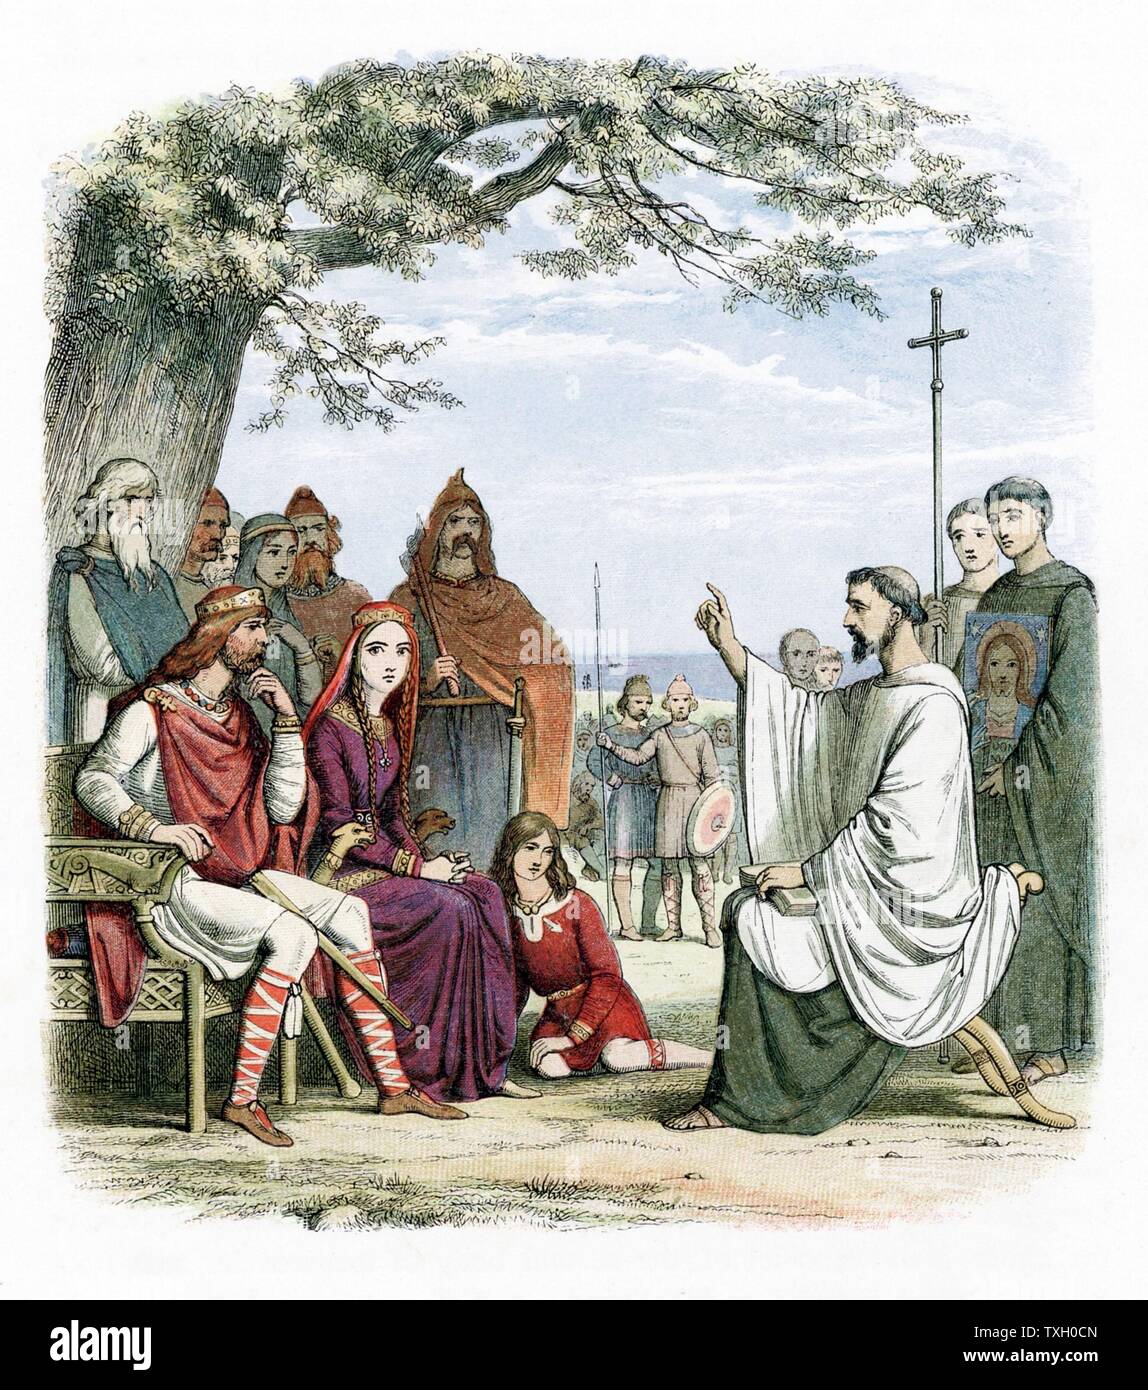 St Augustine Of Canterbury D 604 Preaching Before Ethelbert 552 616 Anglo Saxon King Of Kent Whom He Baptised In 597 Augustine Sent By Pope Gregory I To Convert Anglo Saxons To Christianity First Archbishop Of